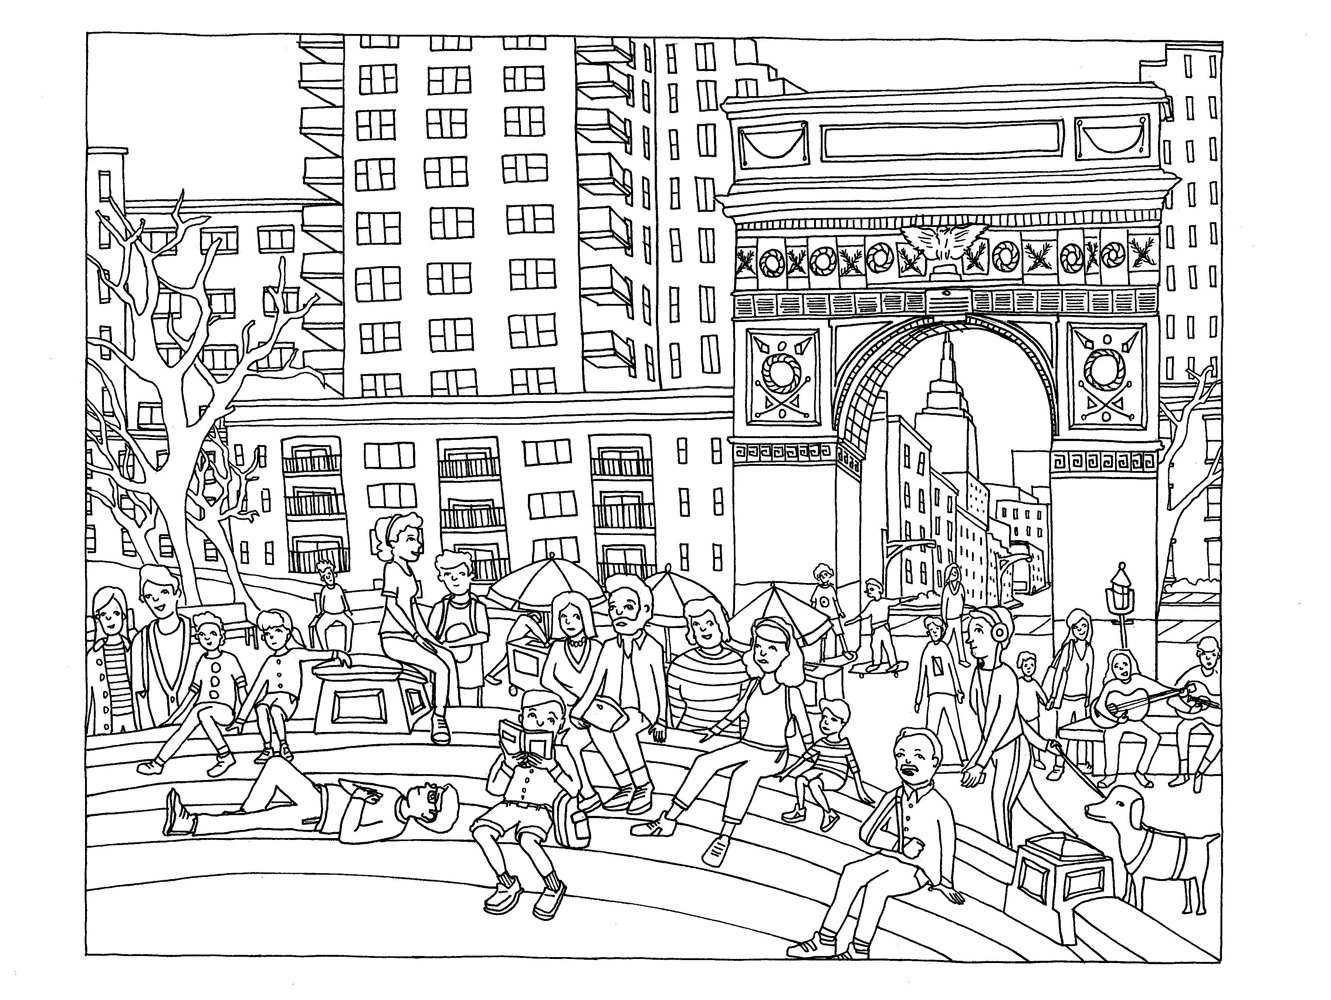 Drawing full a characters of the Washington square, in New York